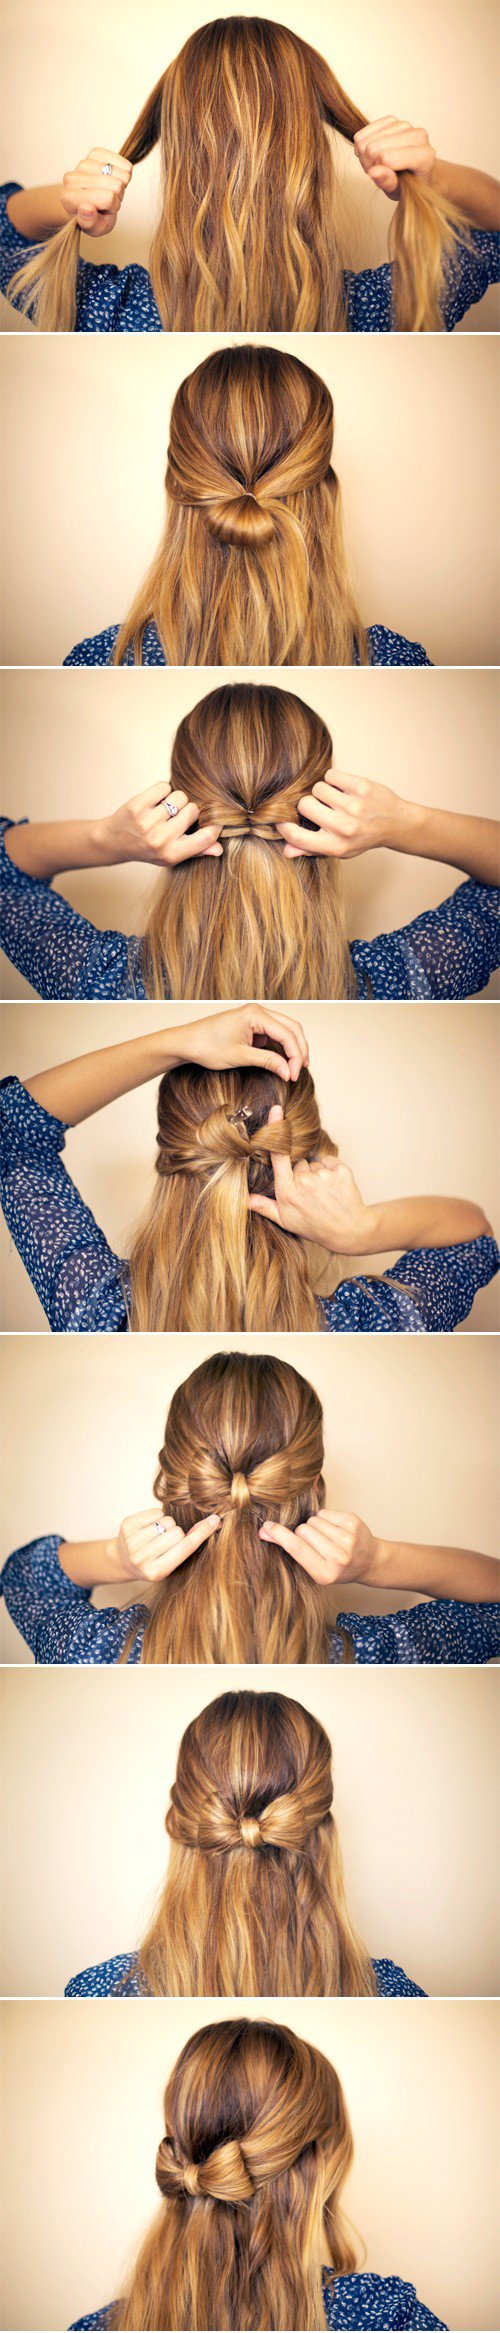 17 Quick And Easy DIY Hairstyle Tutorials - ALL FOR FASHION DESIGN